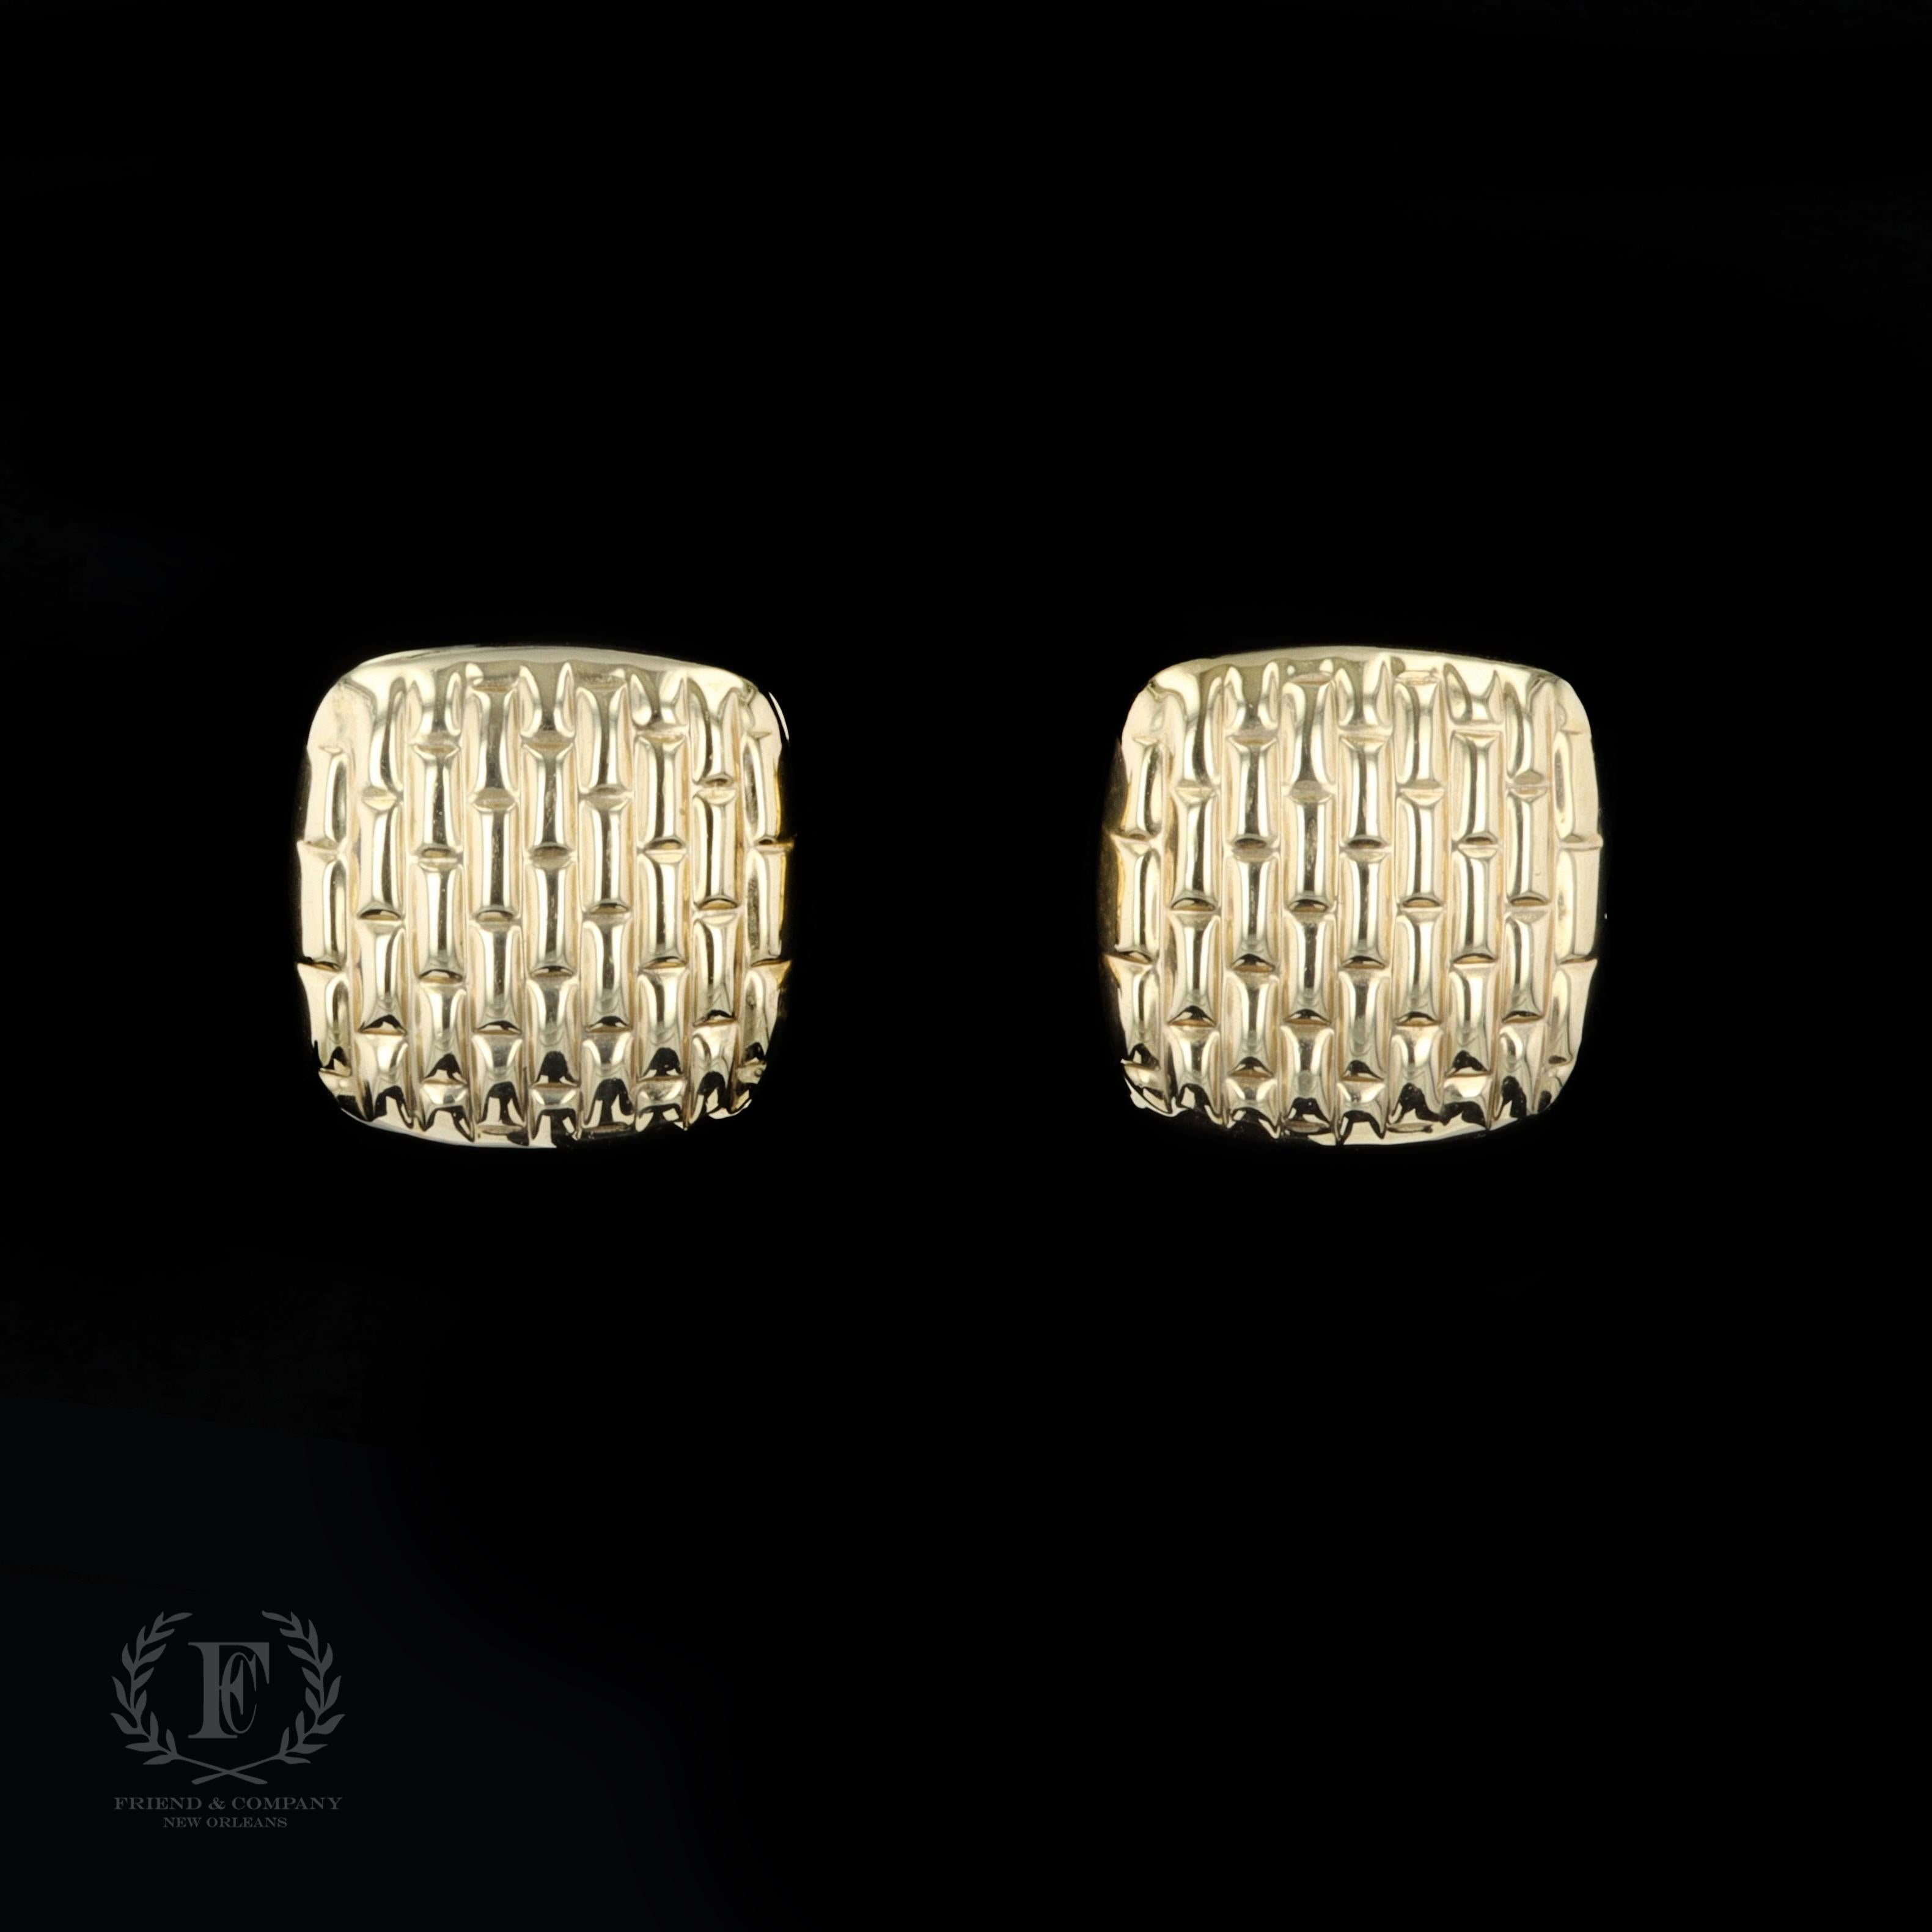 This pair of 14 karat yellow gold hollow brick motif estate earrings will add elegance to any outfit. The earrings feature omega clip backs and a striking raised design.